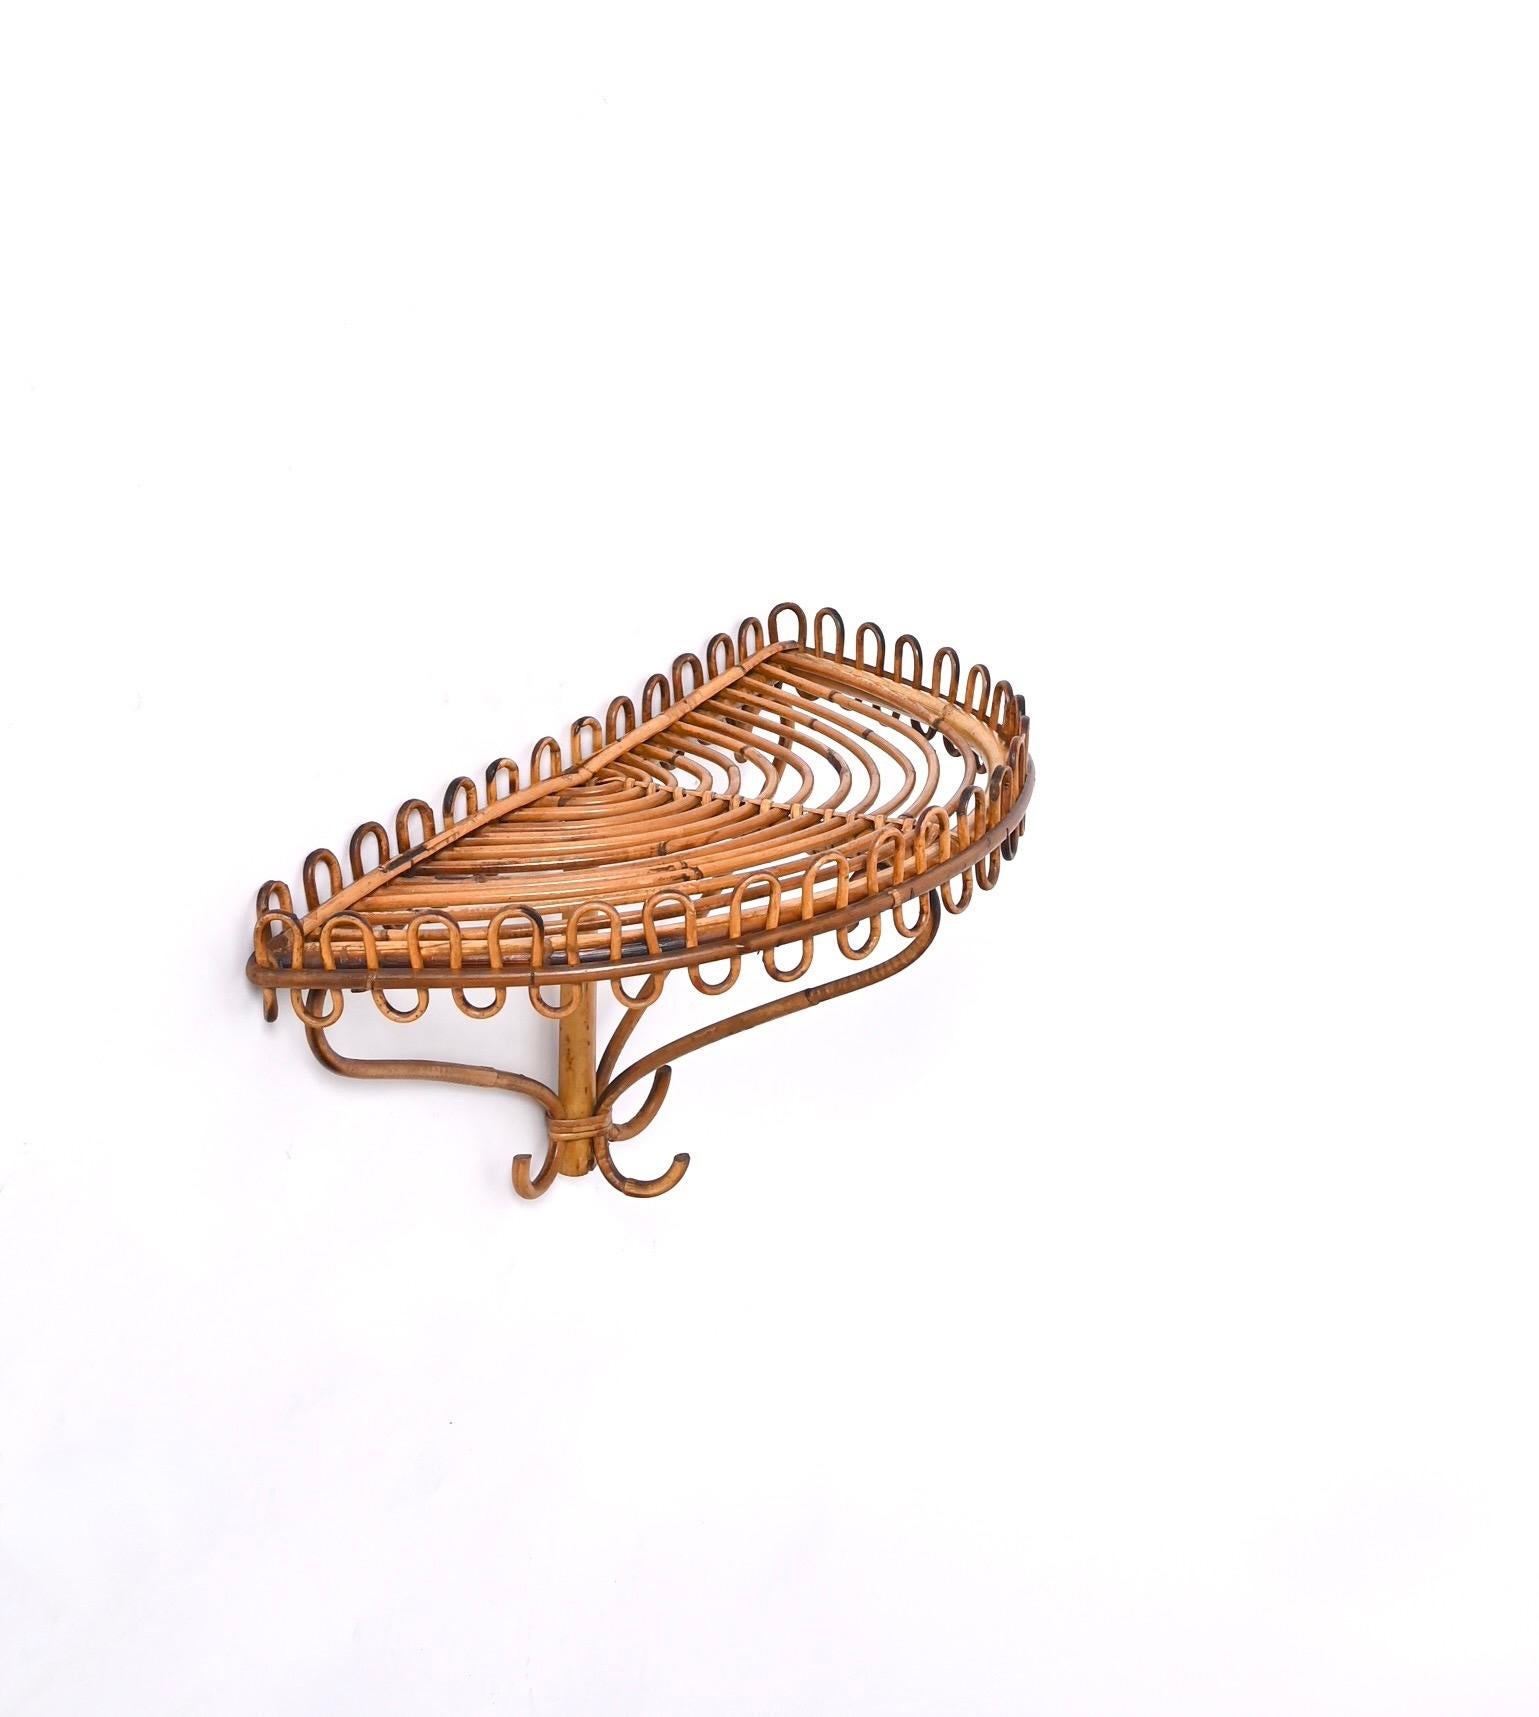 Extraordinary midcentury Bamboo and Rattan Wall Shelf. This marvellous object was made in Italy in the 1960s and is attributed to the mastery of Franco Albini.

This fantastic shelf consist of a curved structure and base in bamboo and rattan, the